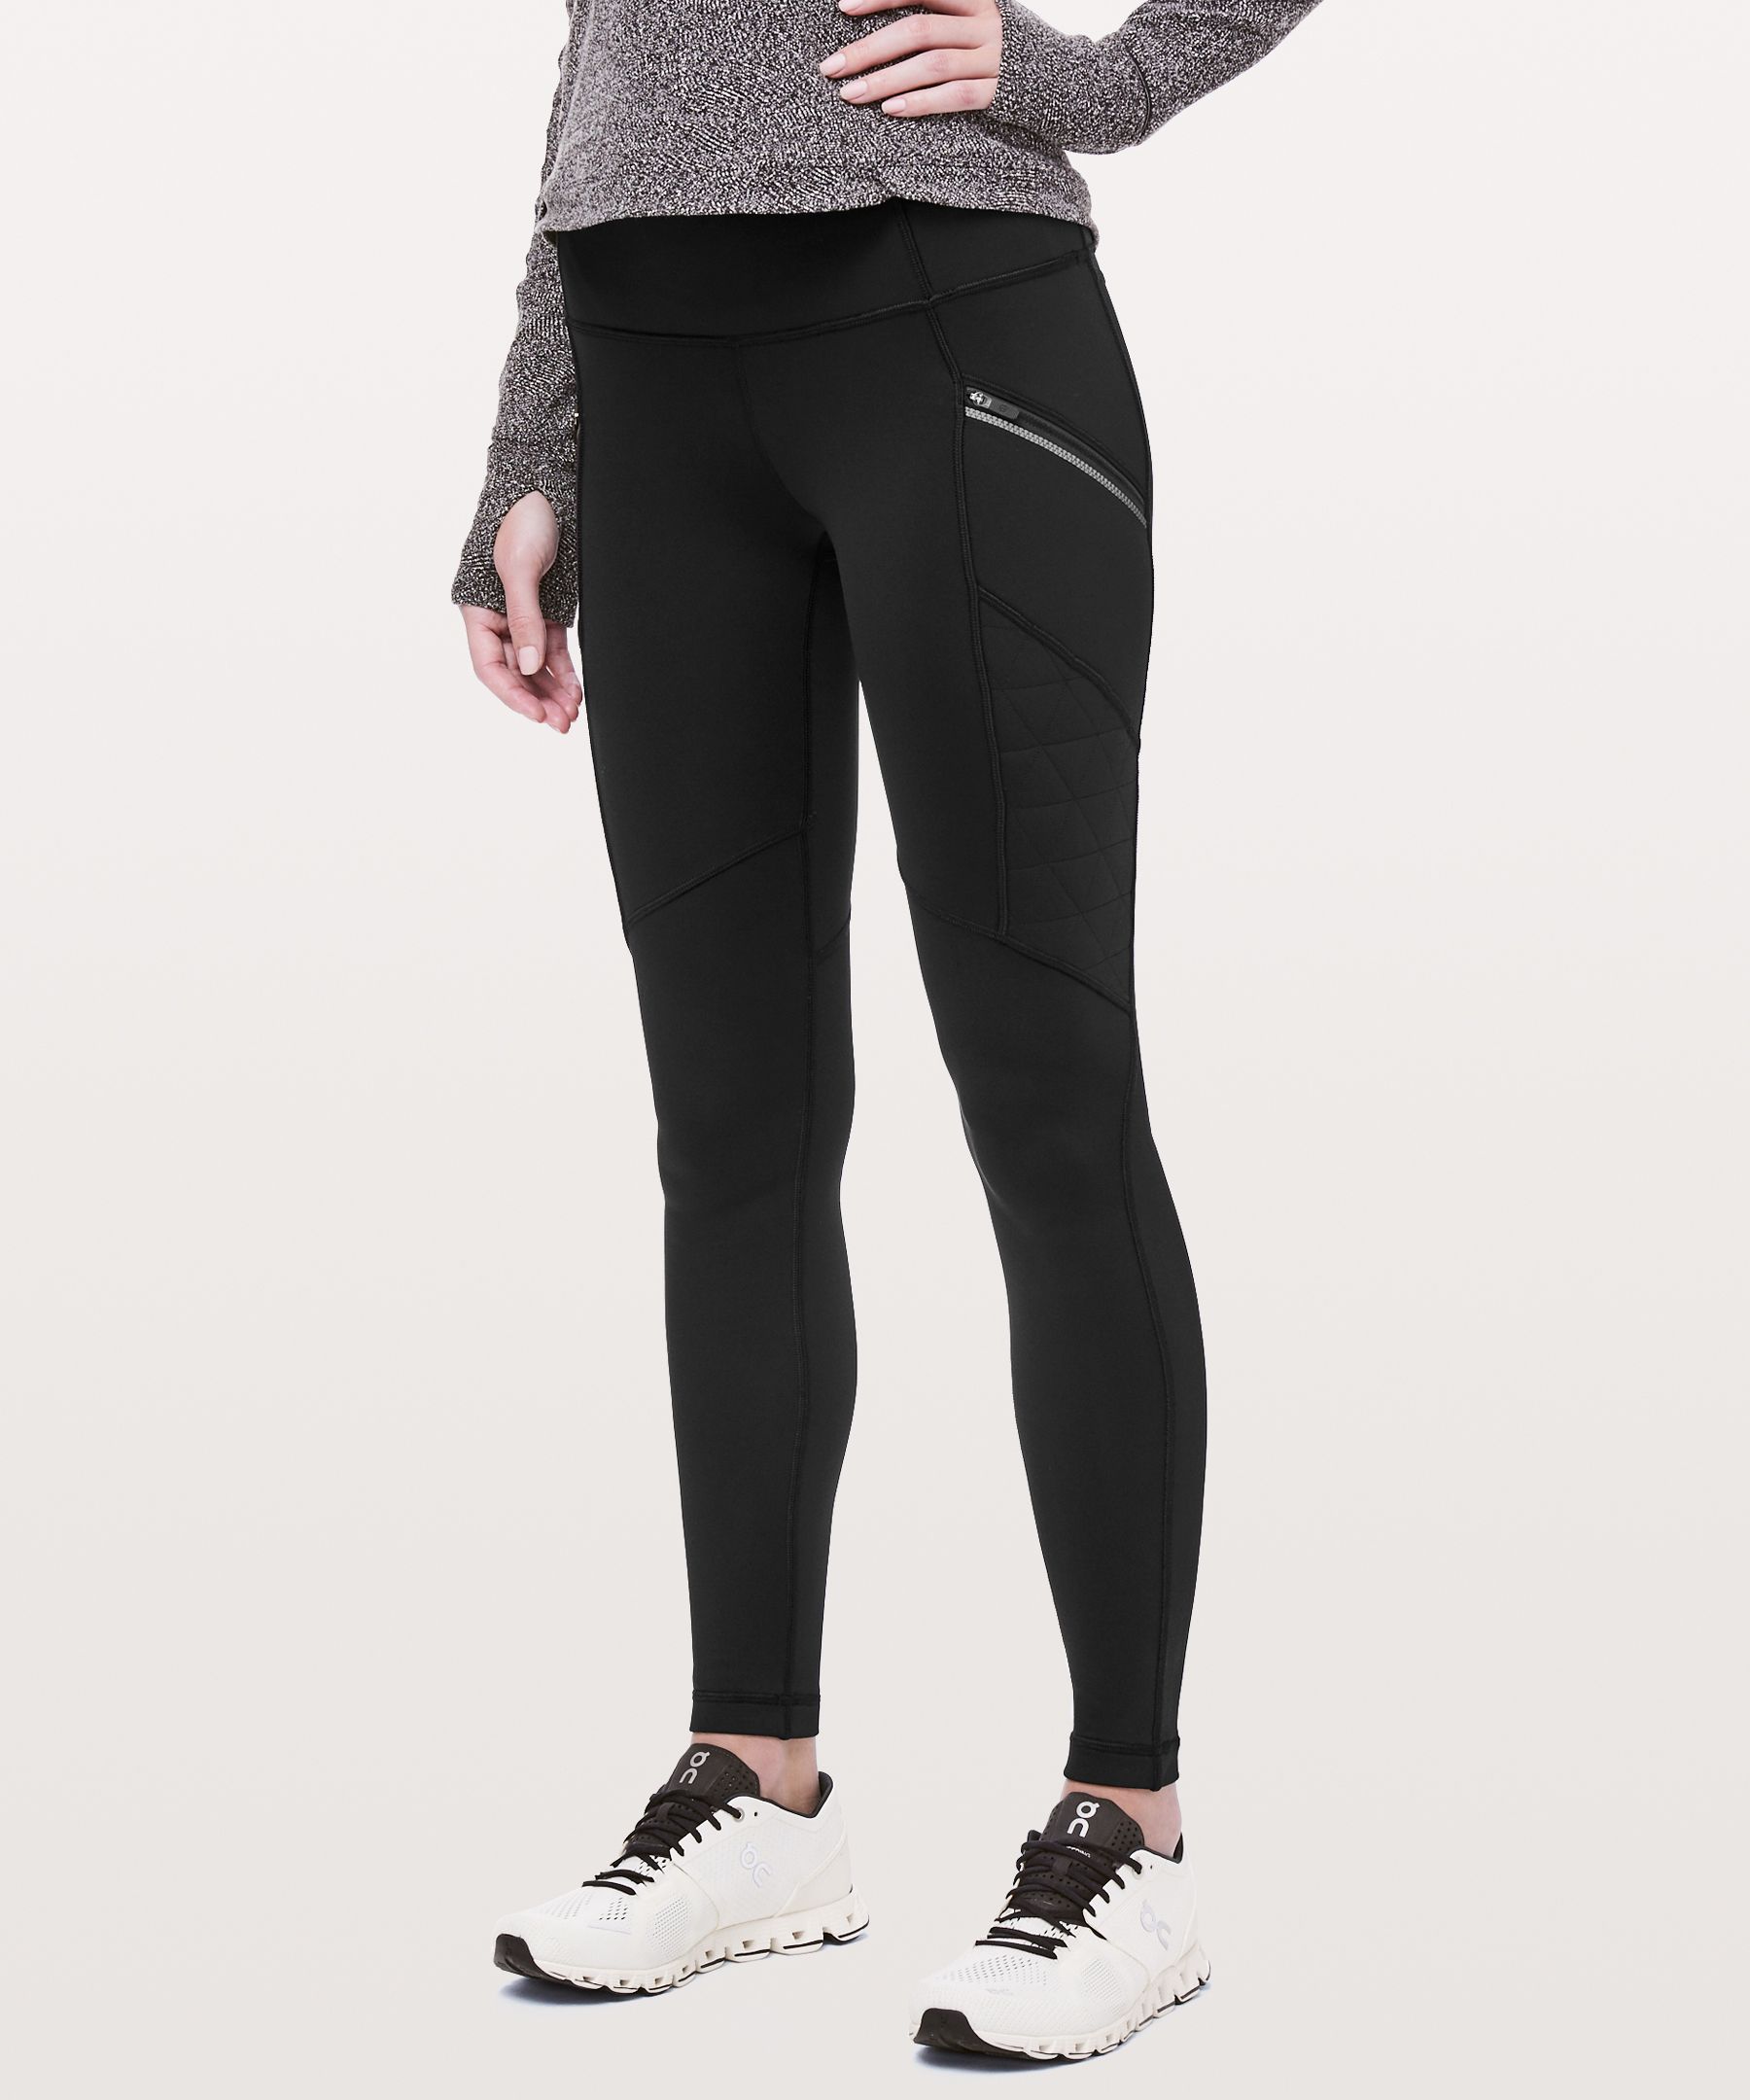 lululemon tights with zipper pockets